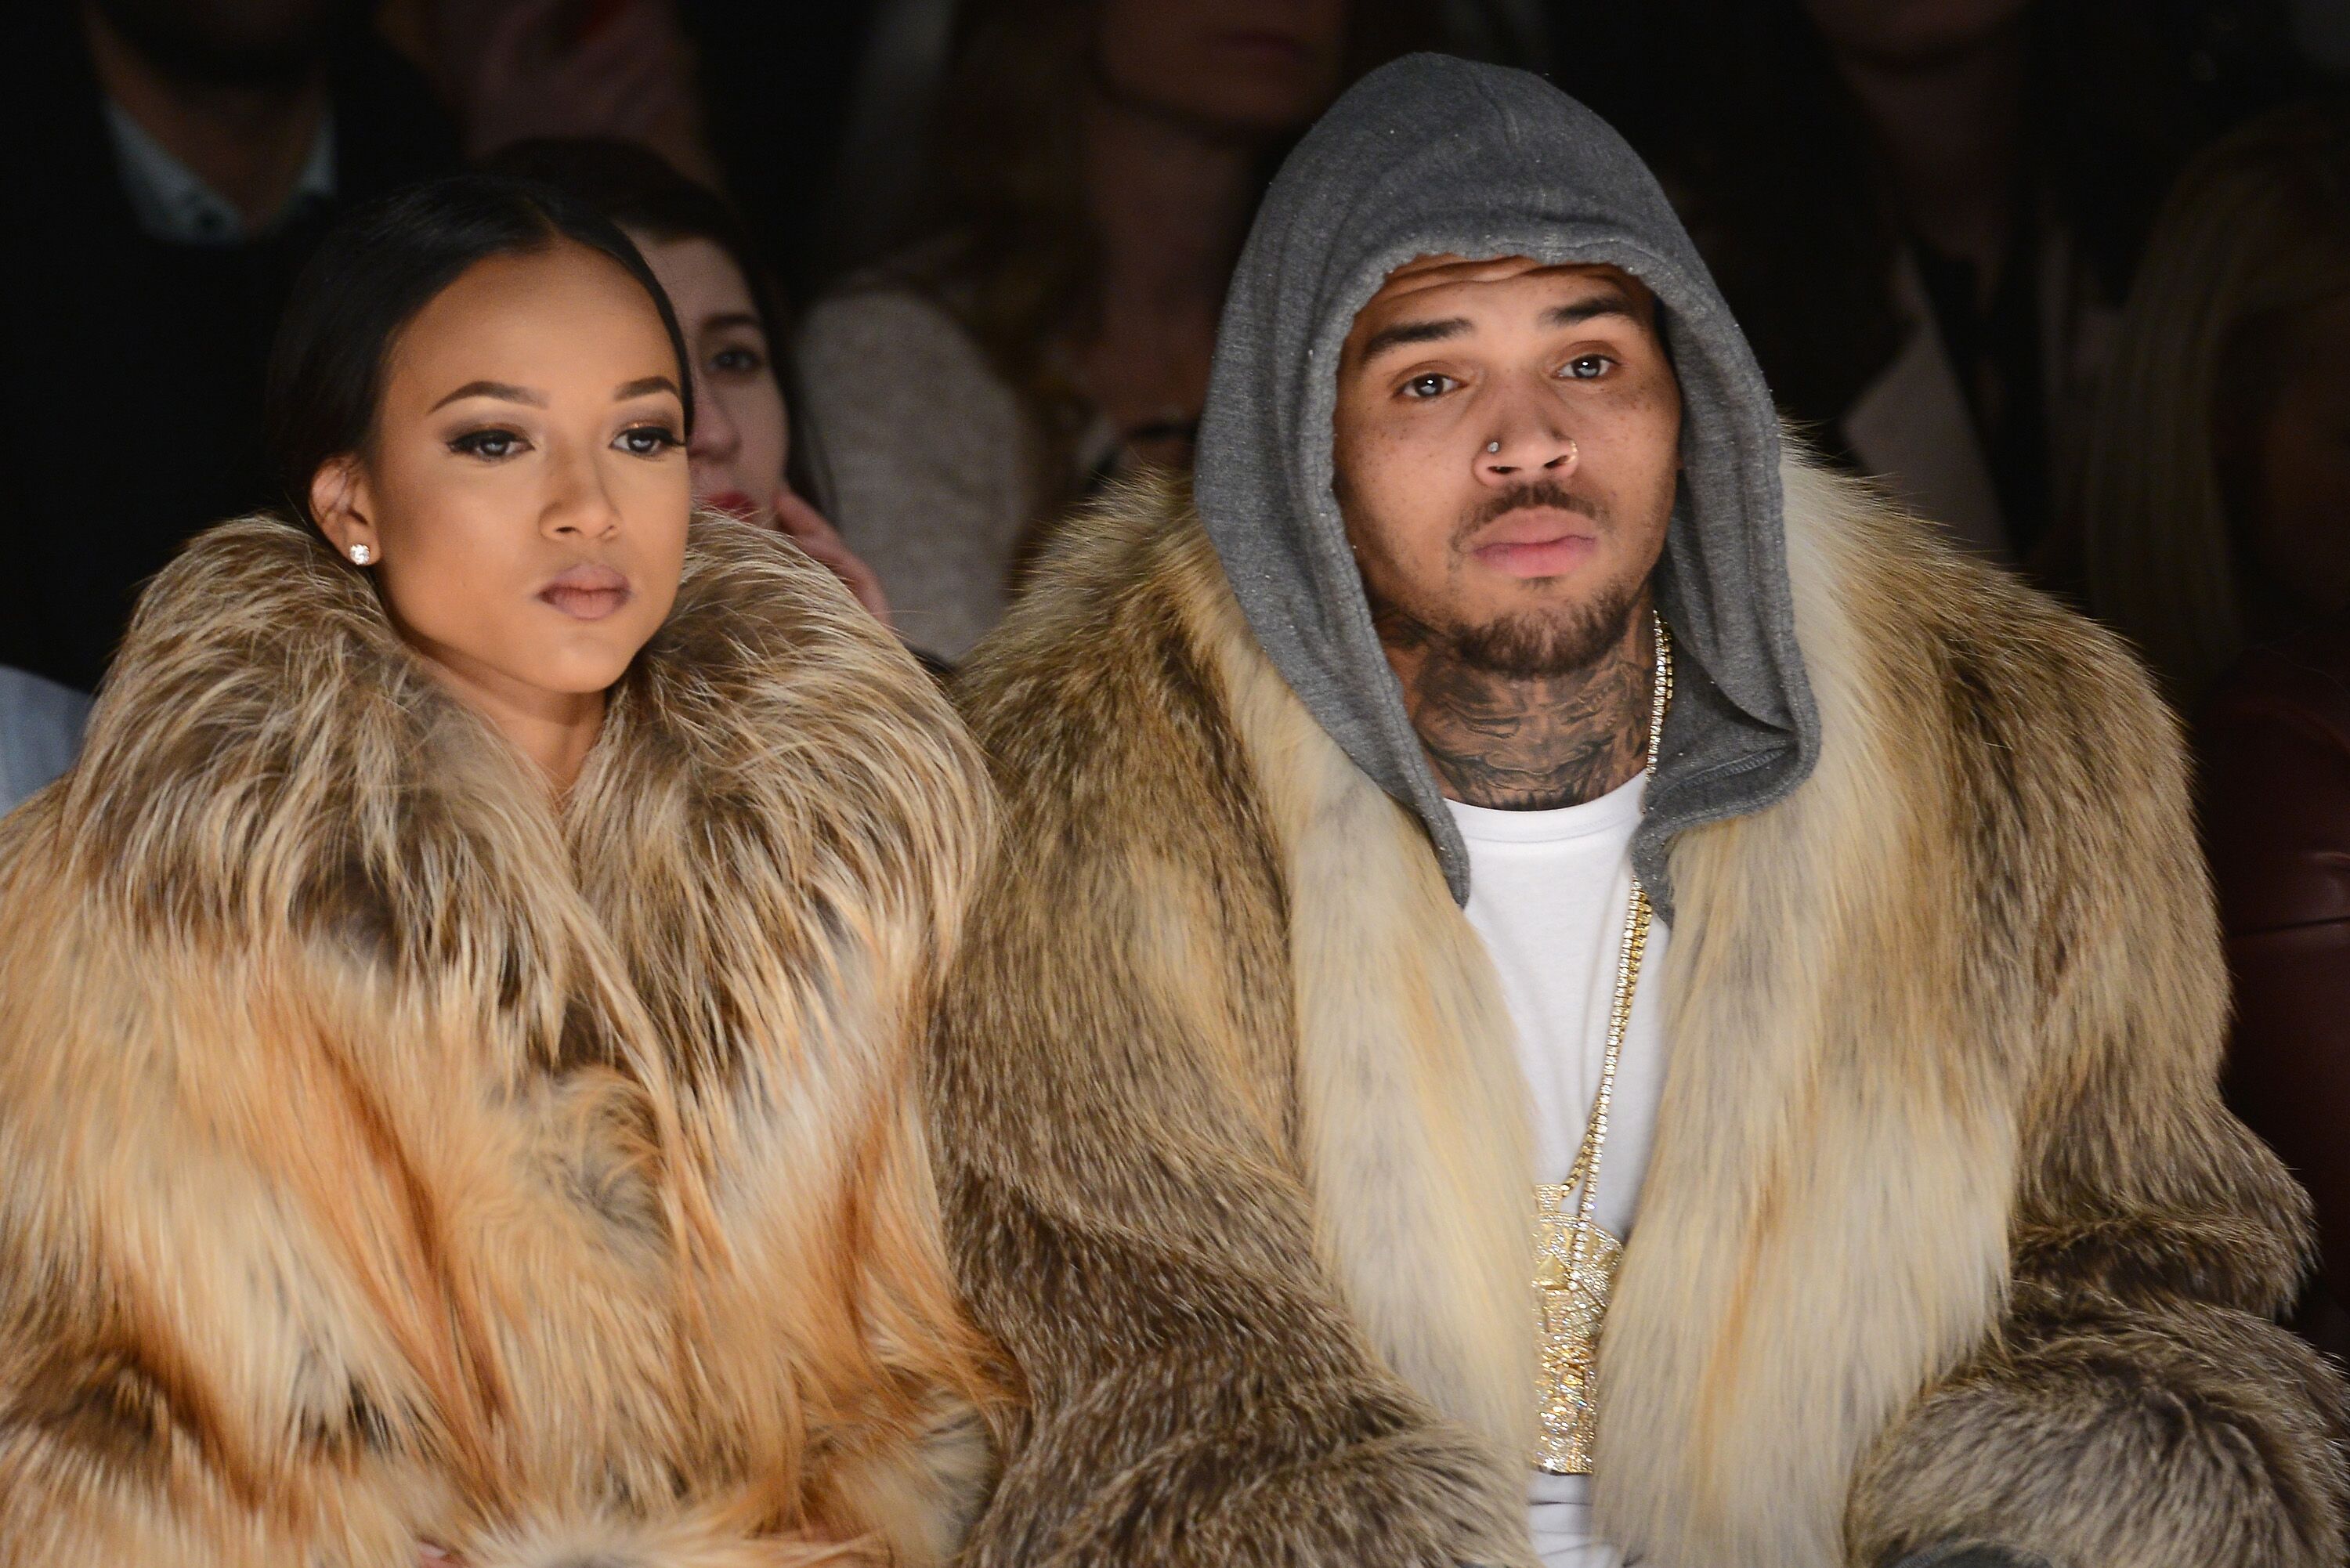 Chris Brown and Ammika Harris at the Mercedes-Benz Fashion Week in February 2015. | Source: Getty Images